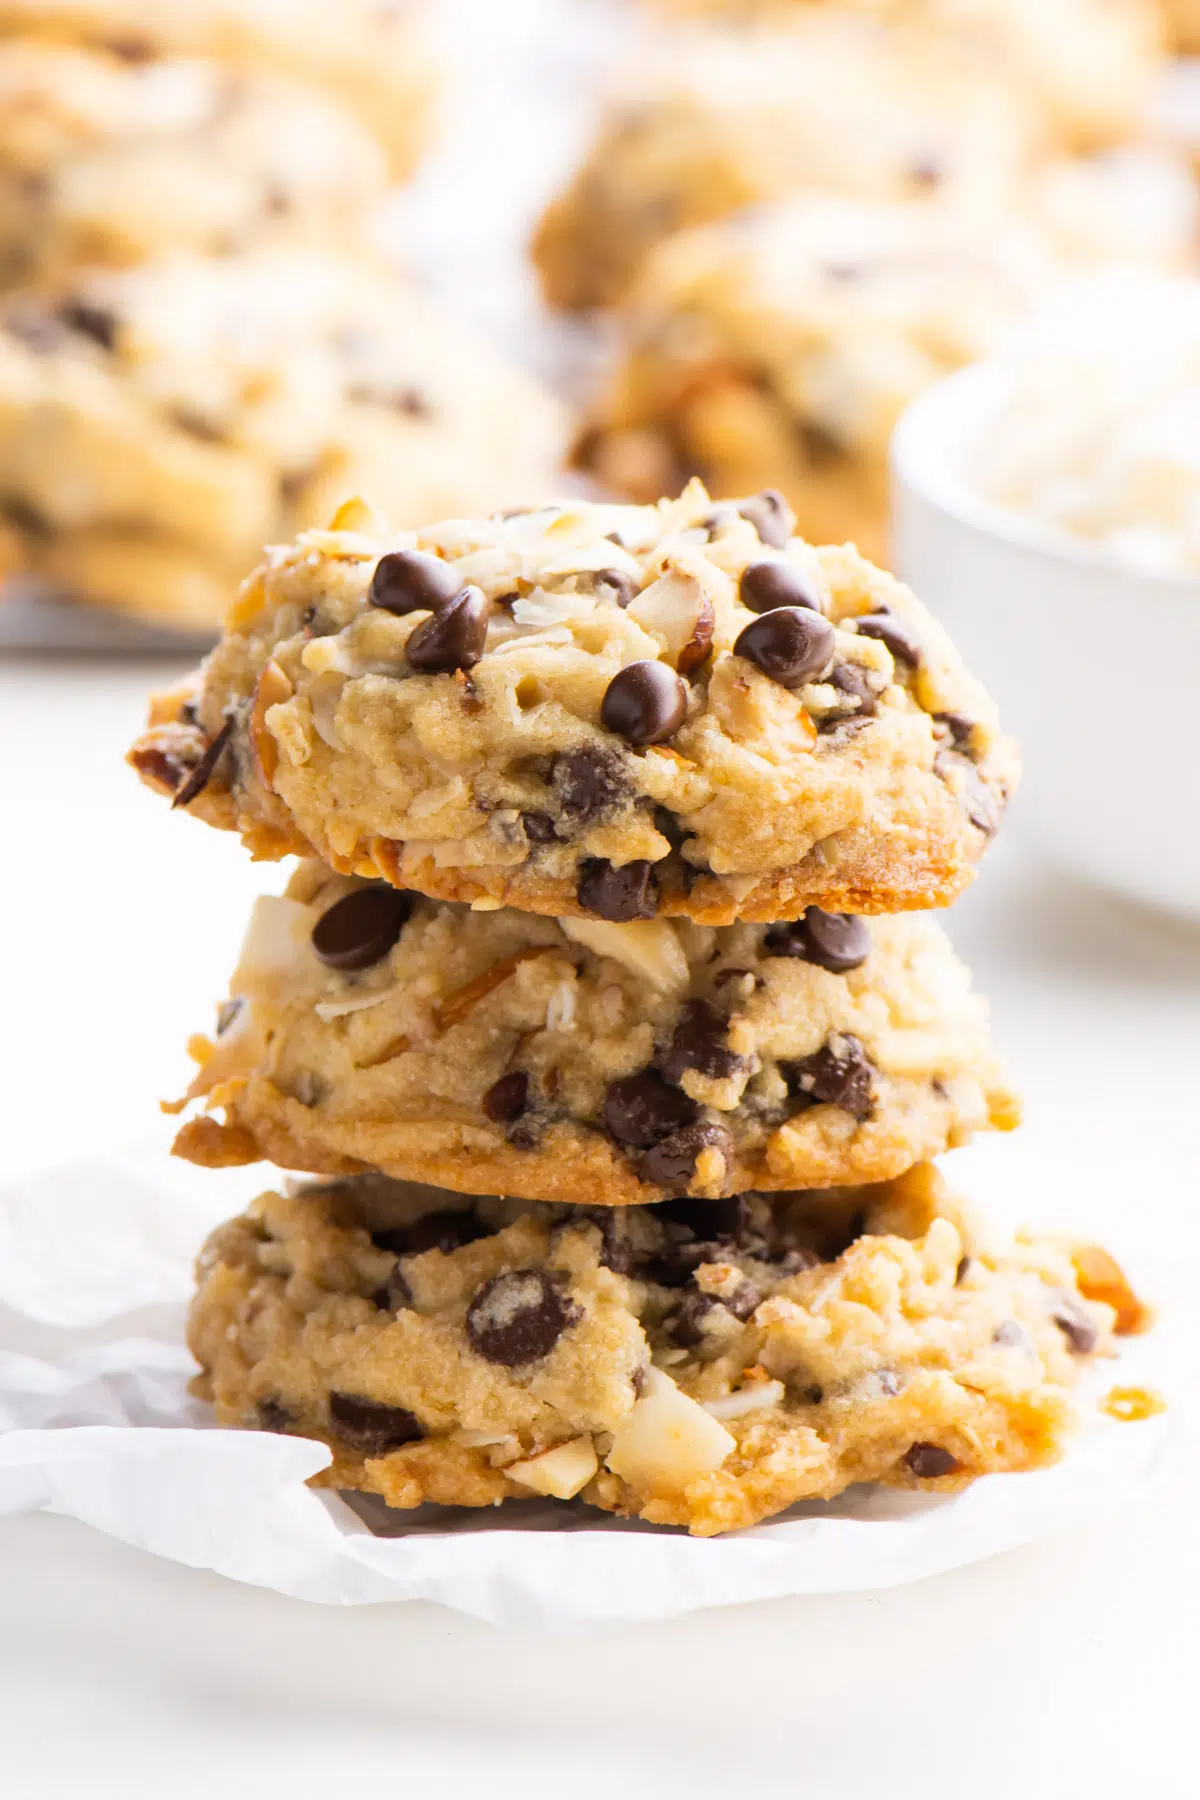 A stack of three almond joy cookies sits in front of a baking rack with more vegan cookies.